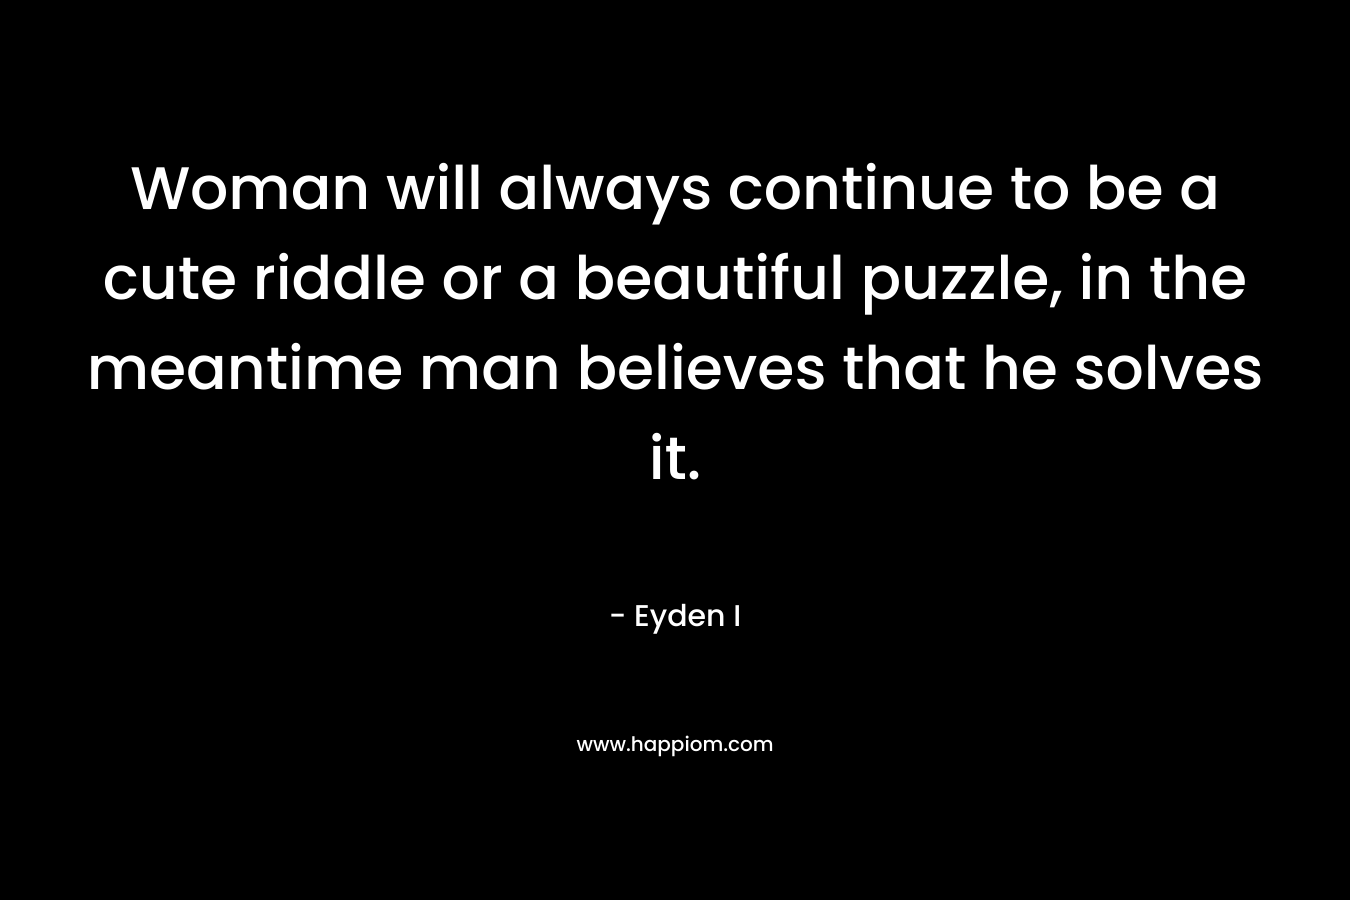 Woman will always continue to be a cute riddle or a beautiful puzzle, in the meantime man believes that he solves it. – Eyden I